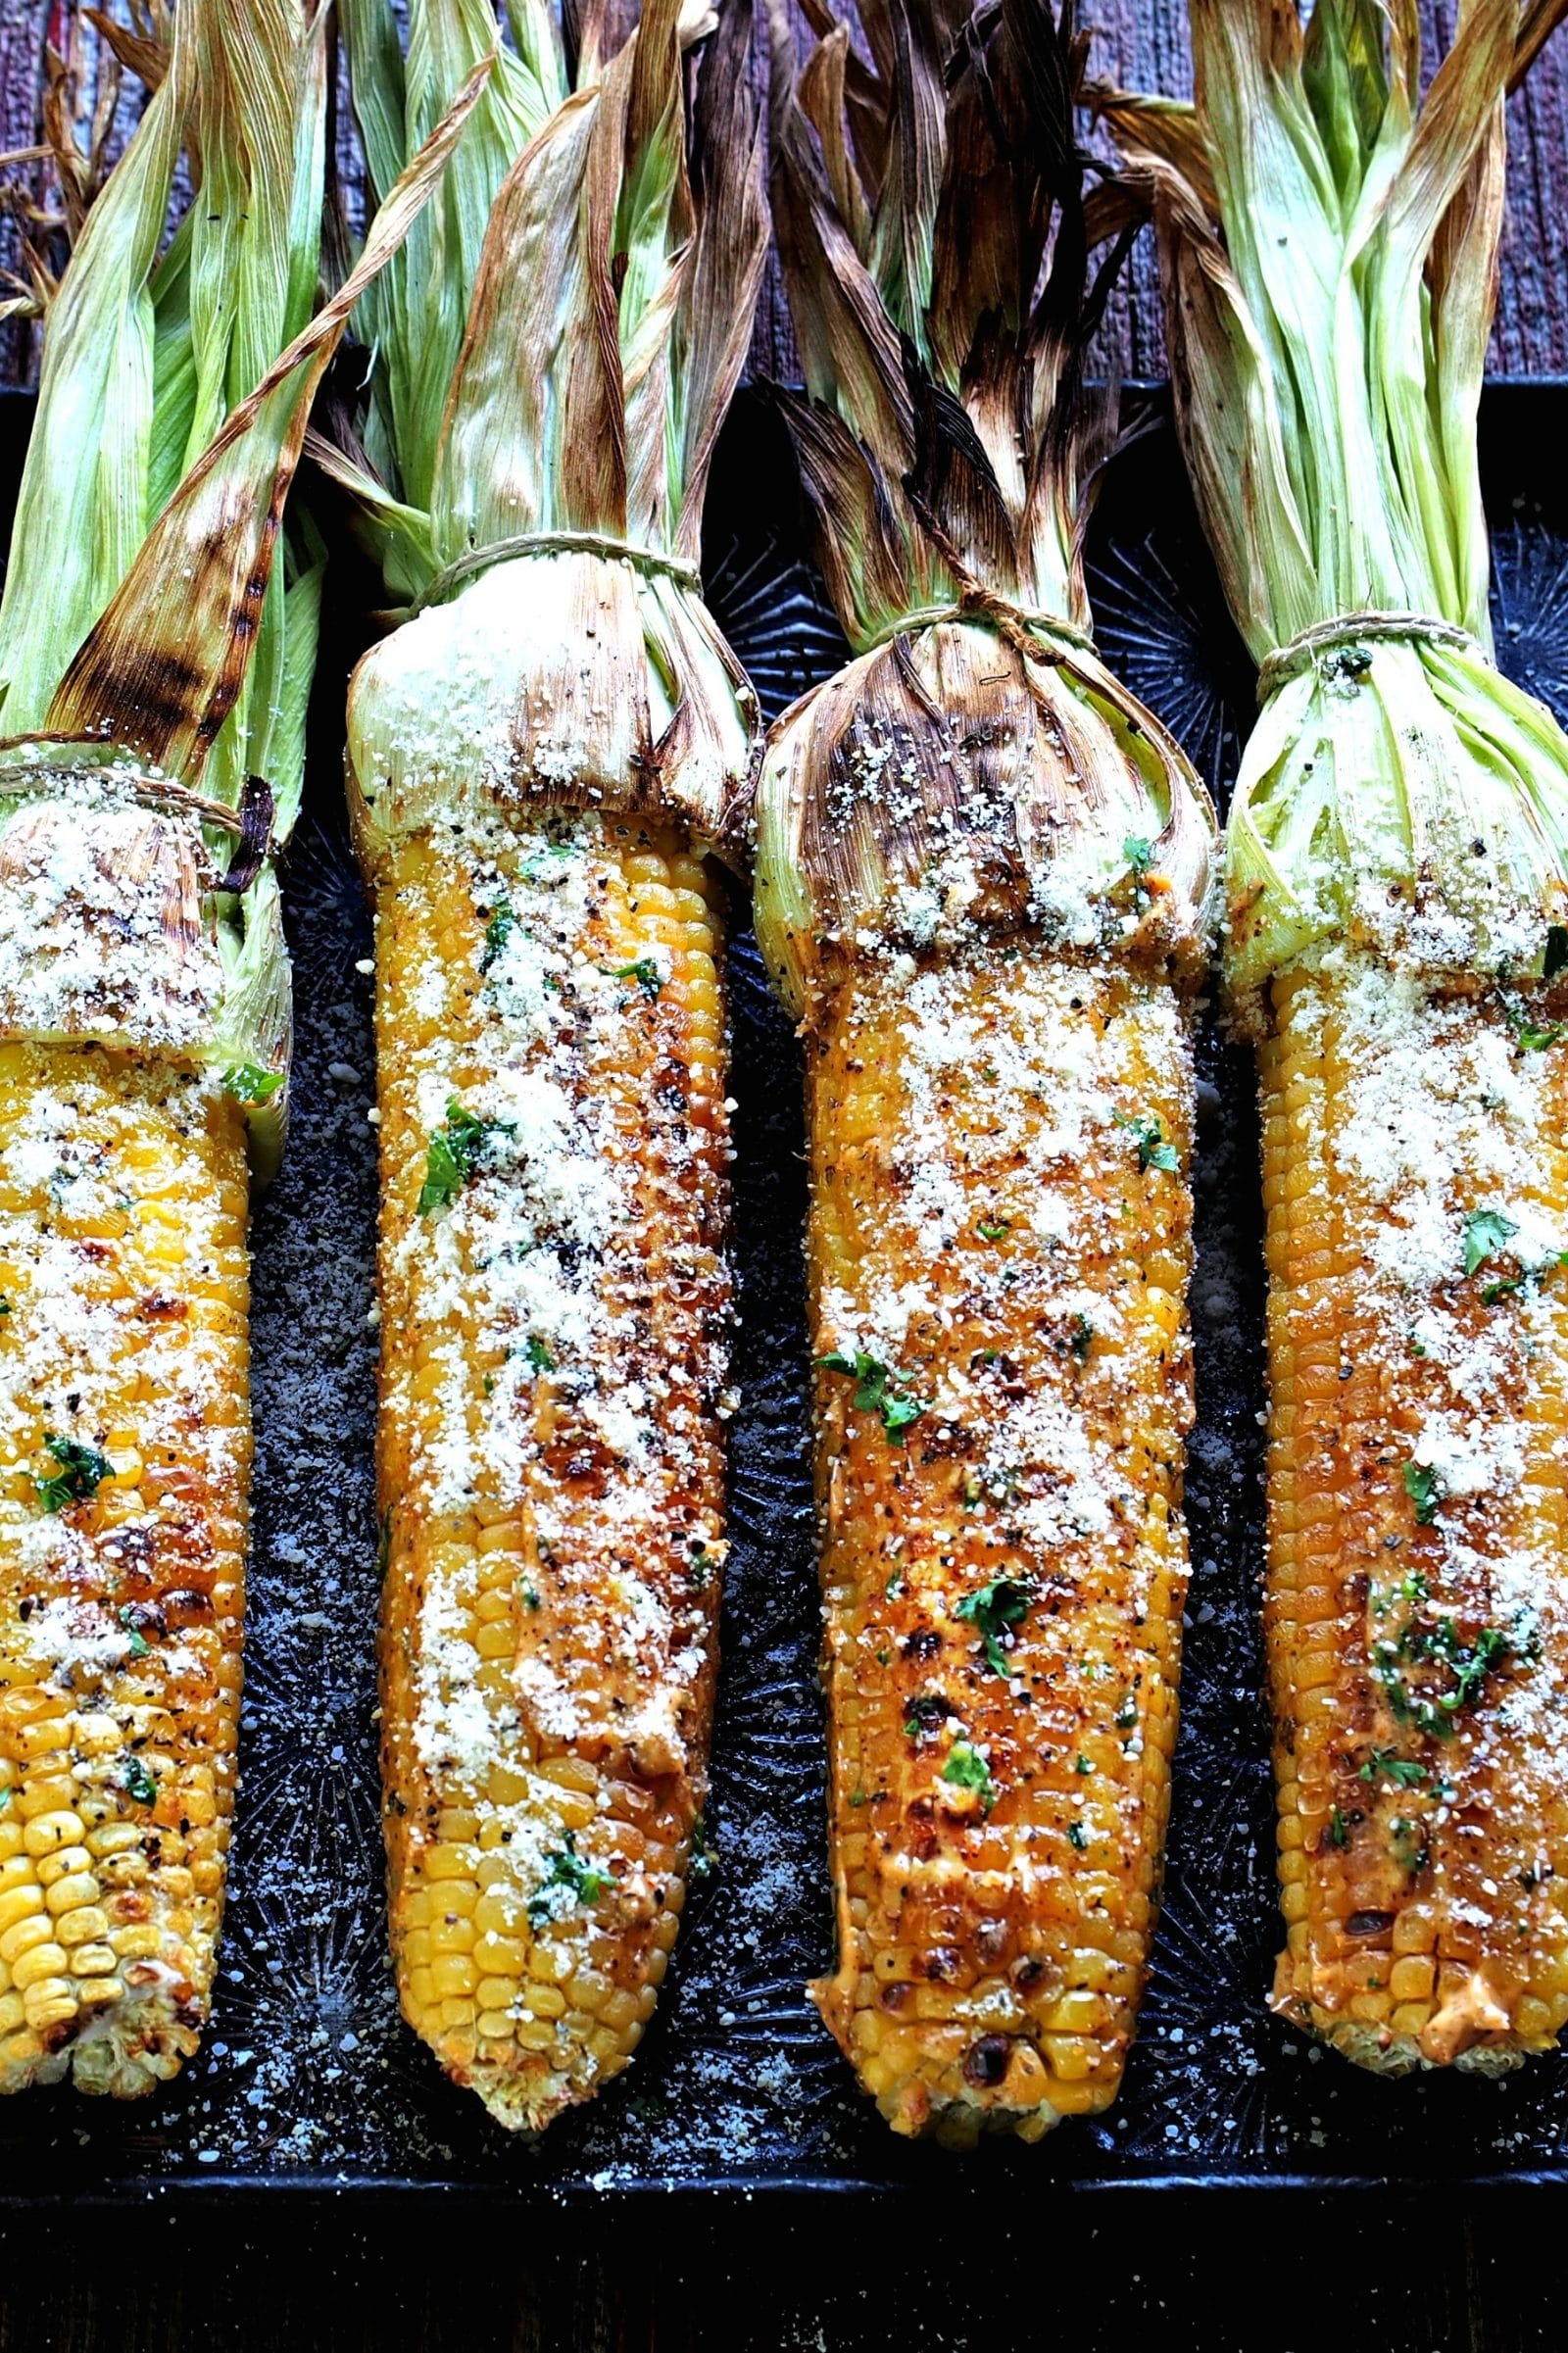 Grilled Corn Simply Sated,Tom Collins Cocktail Variations